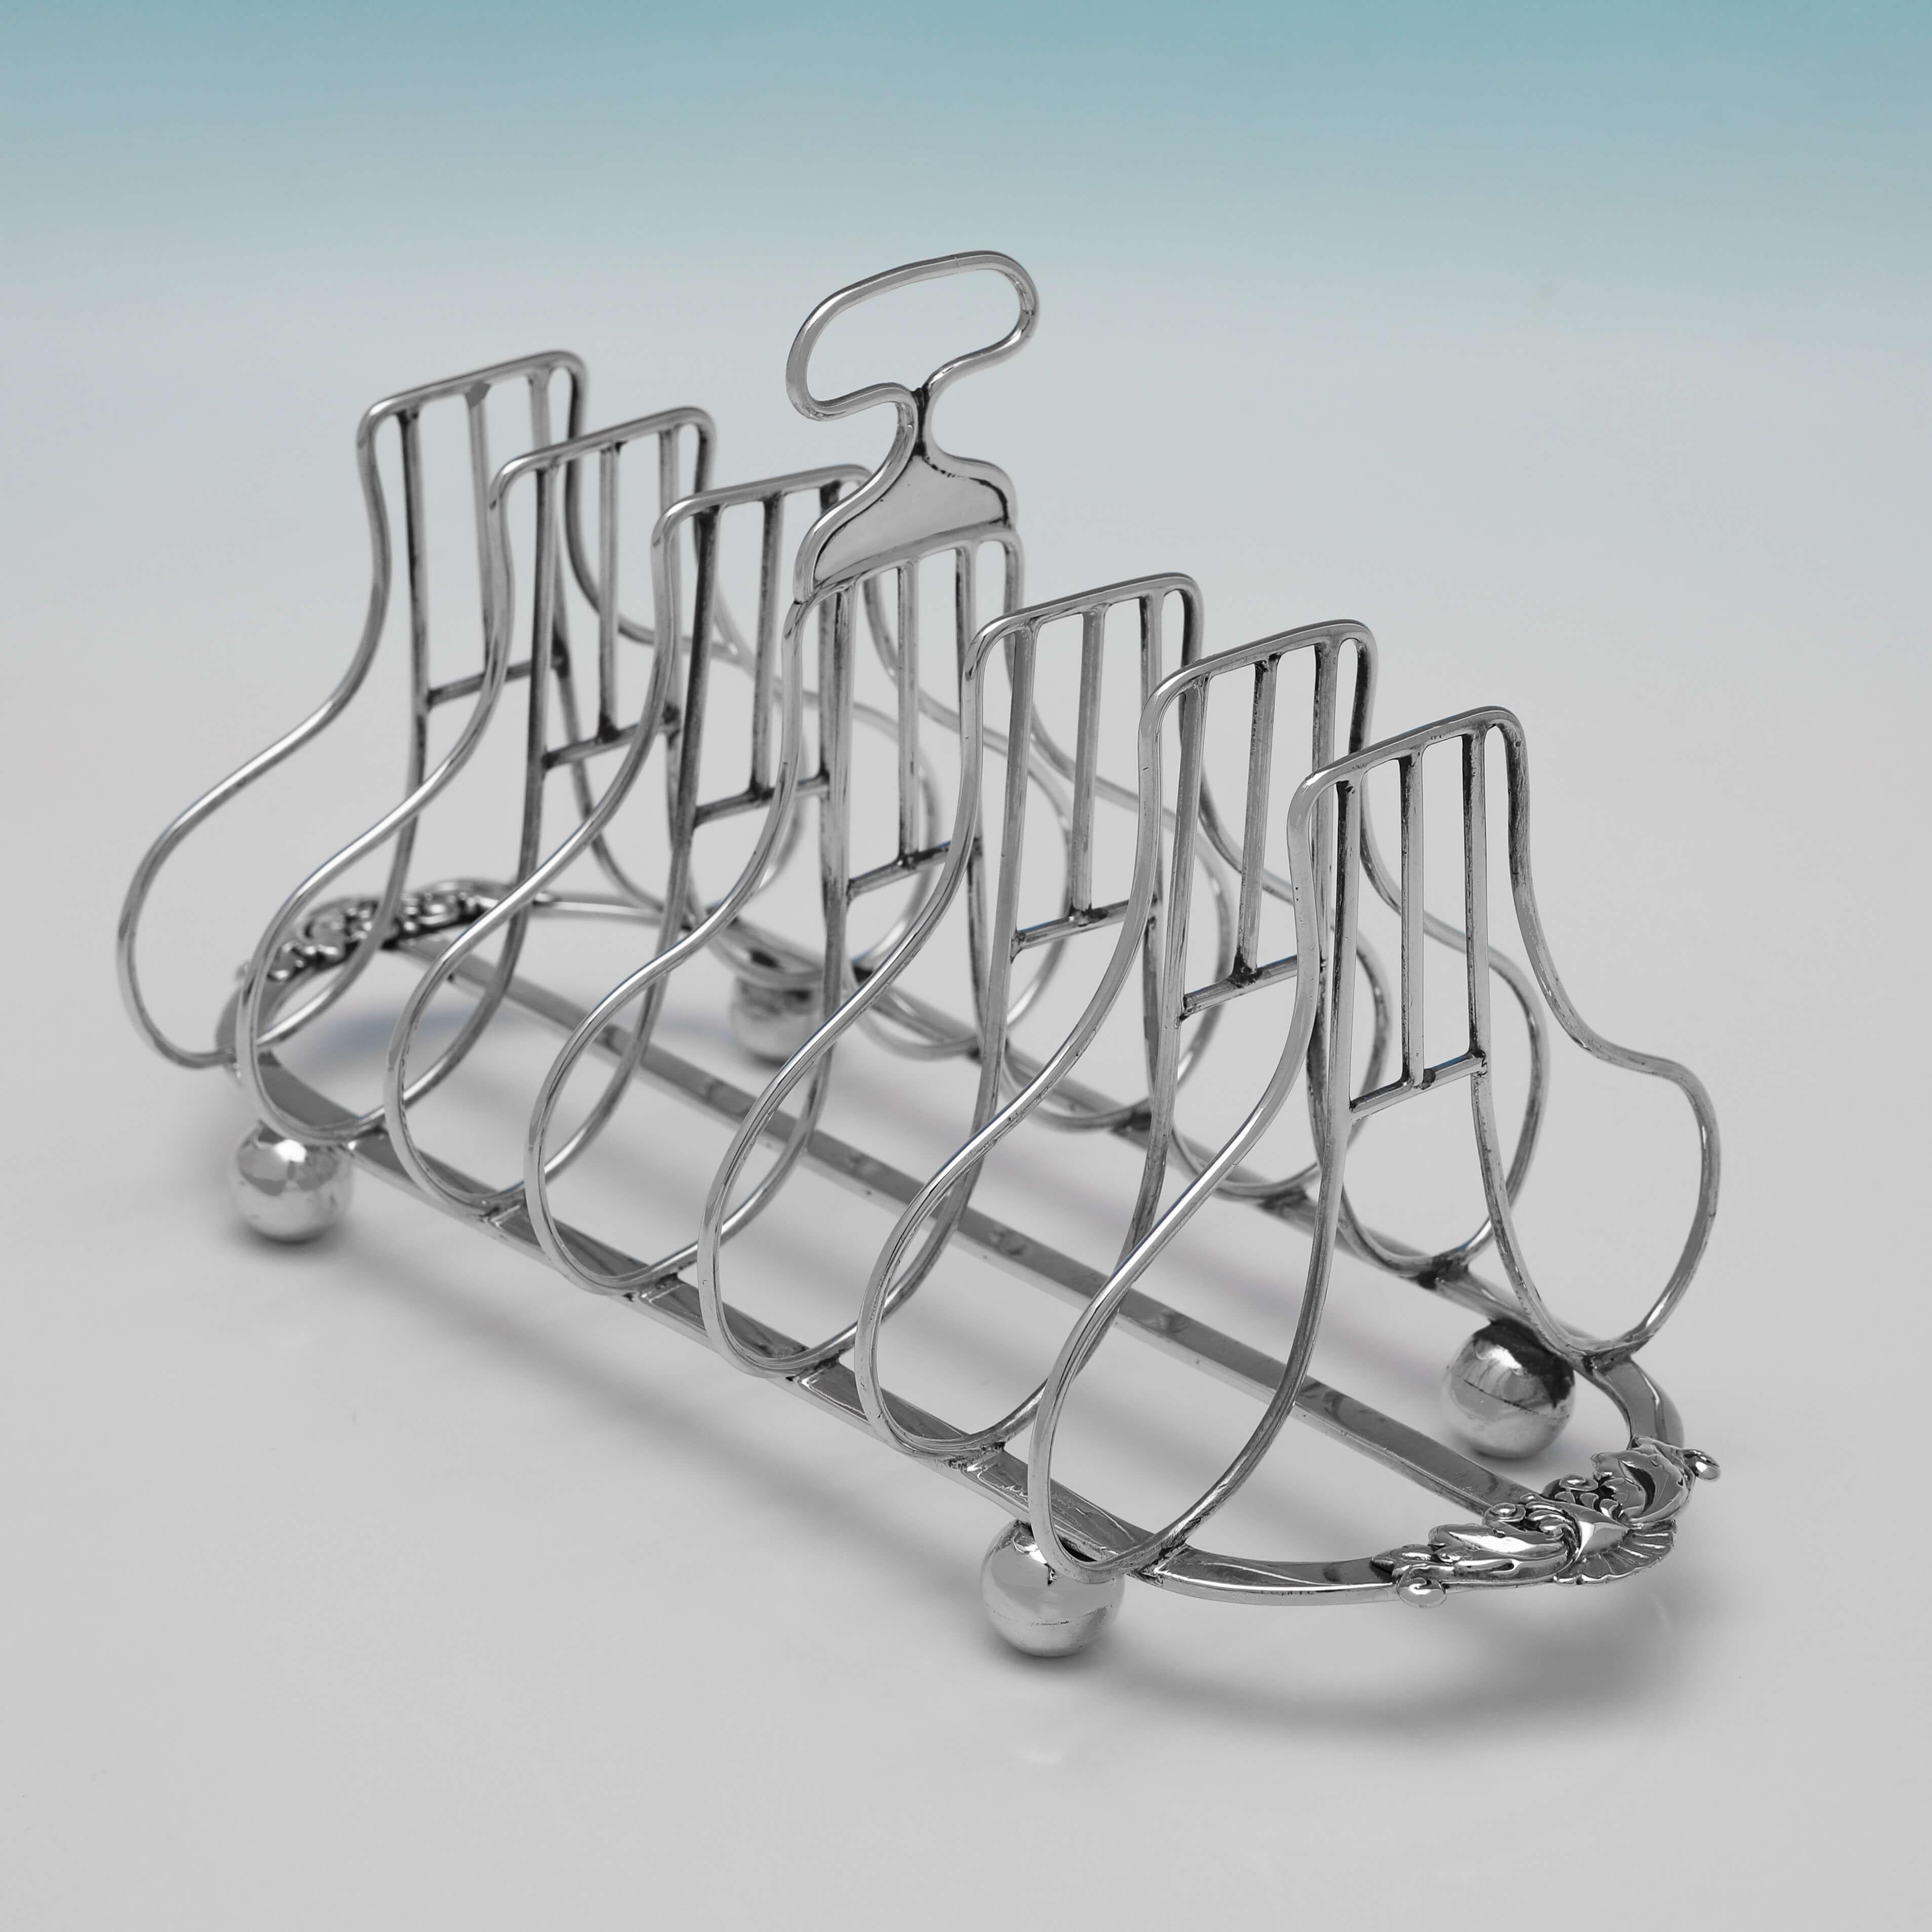 English Regency Period Sterling Silver Toast Rack - London 1815 Joseph Angell I For Sale